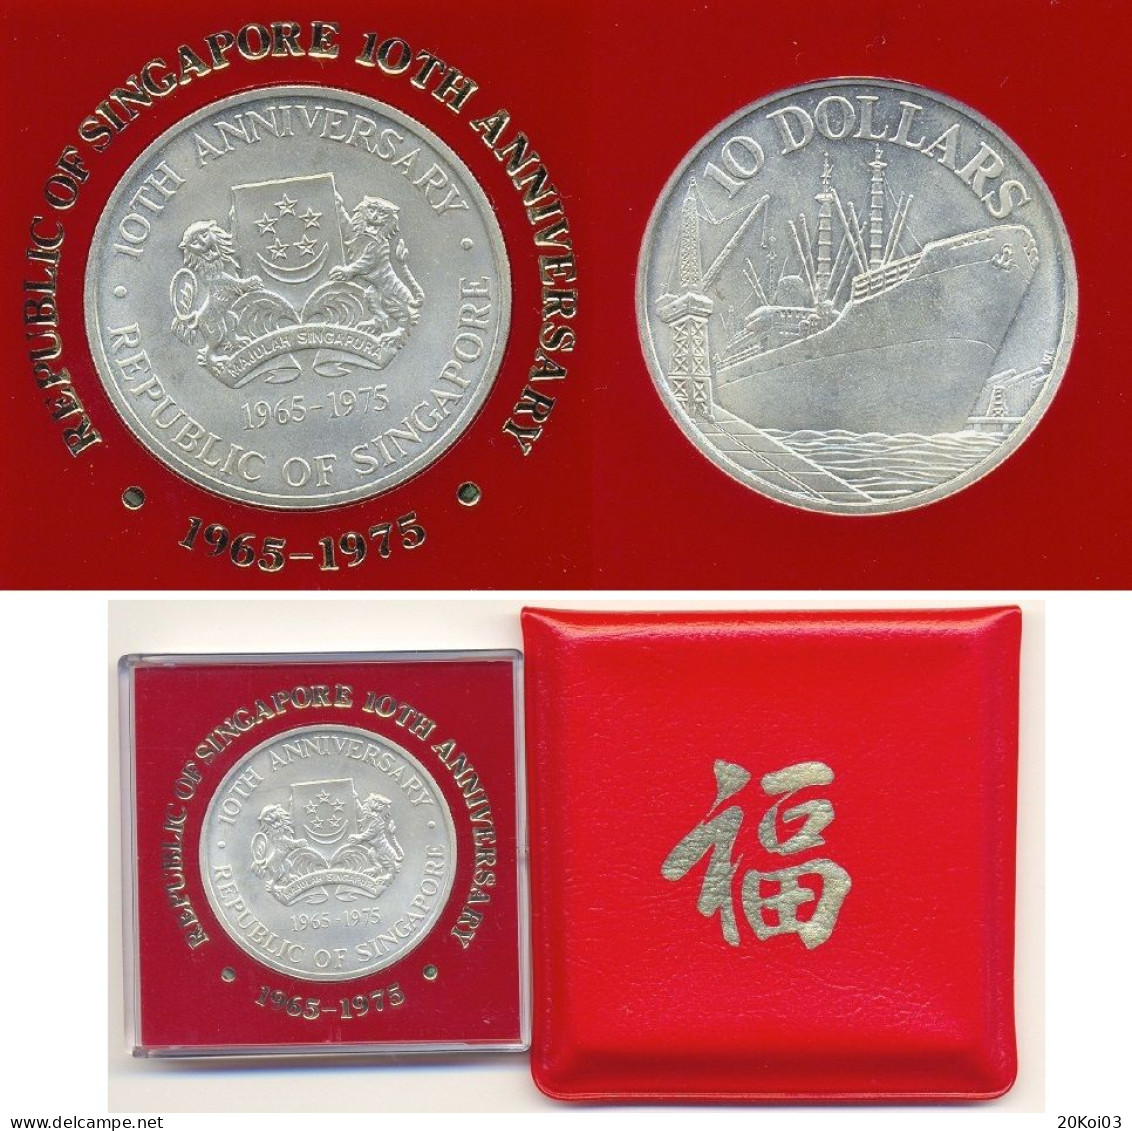 Singapore 10 Dollars 1965-1975 10th Anniversary Coin Argent-Silver - Singapore